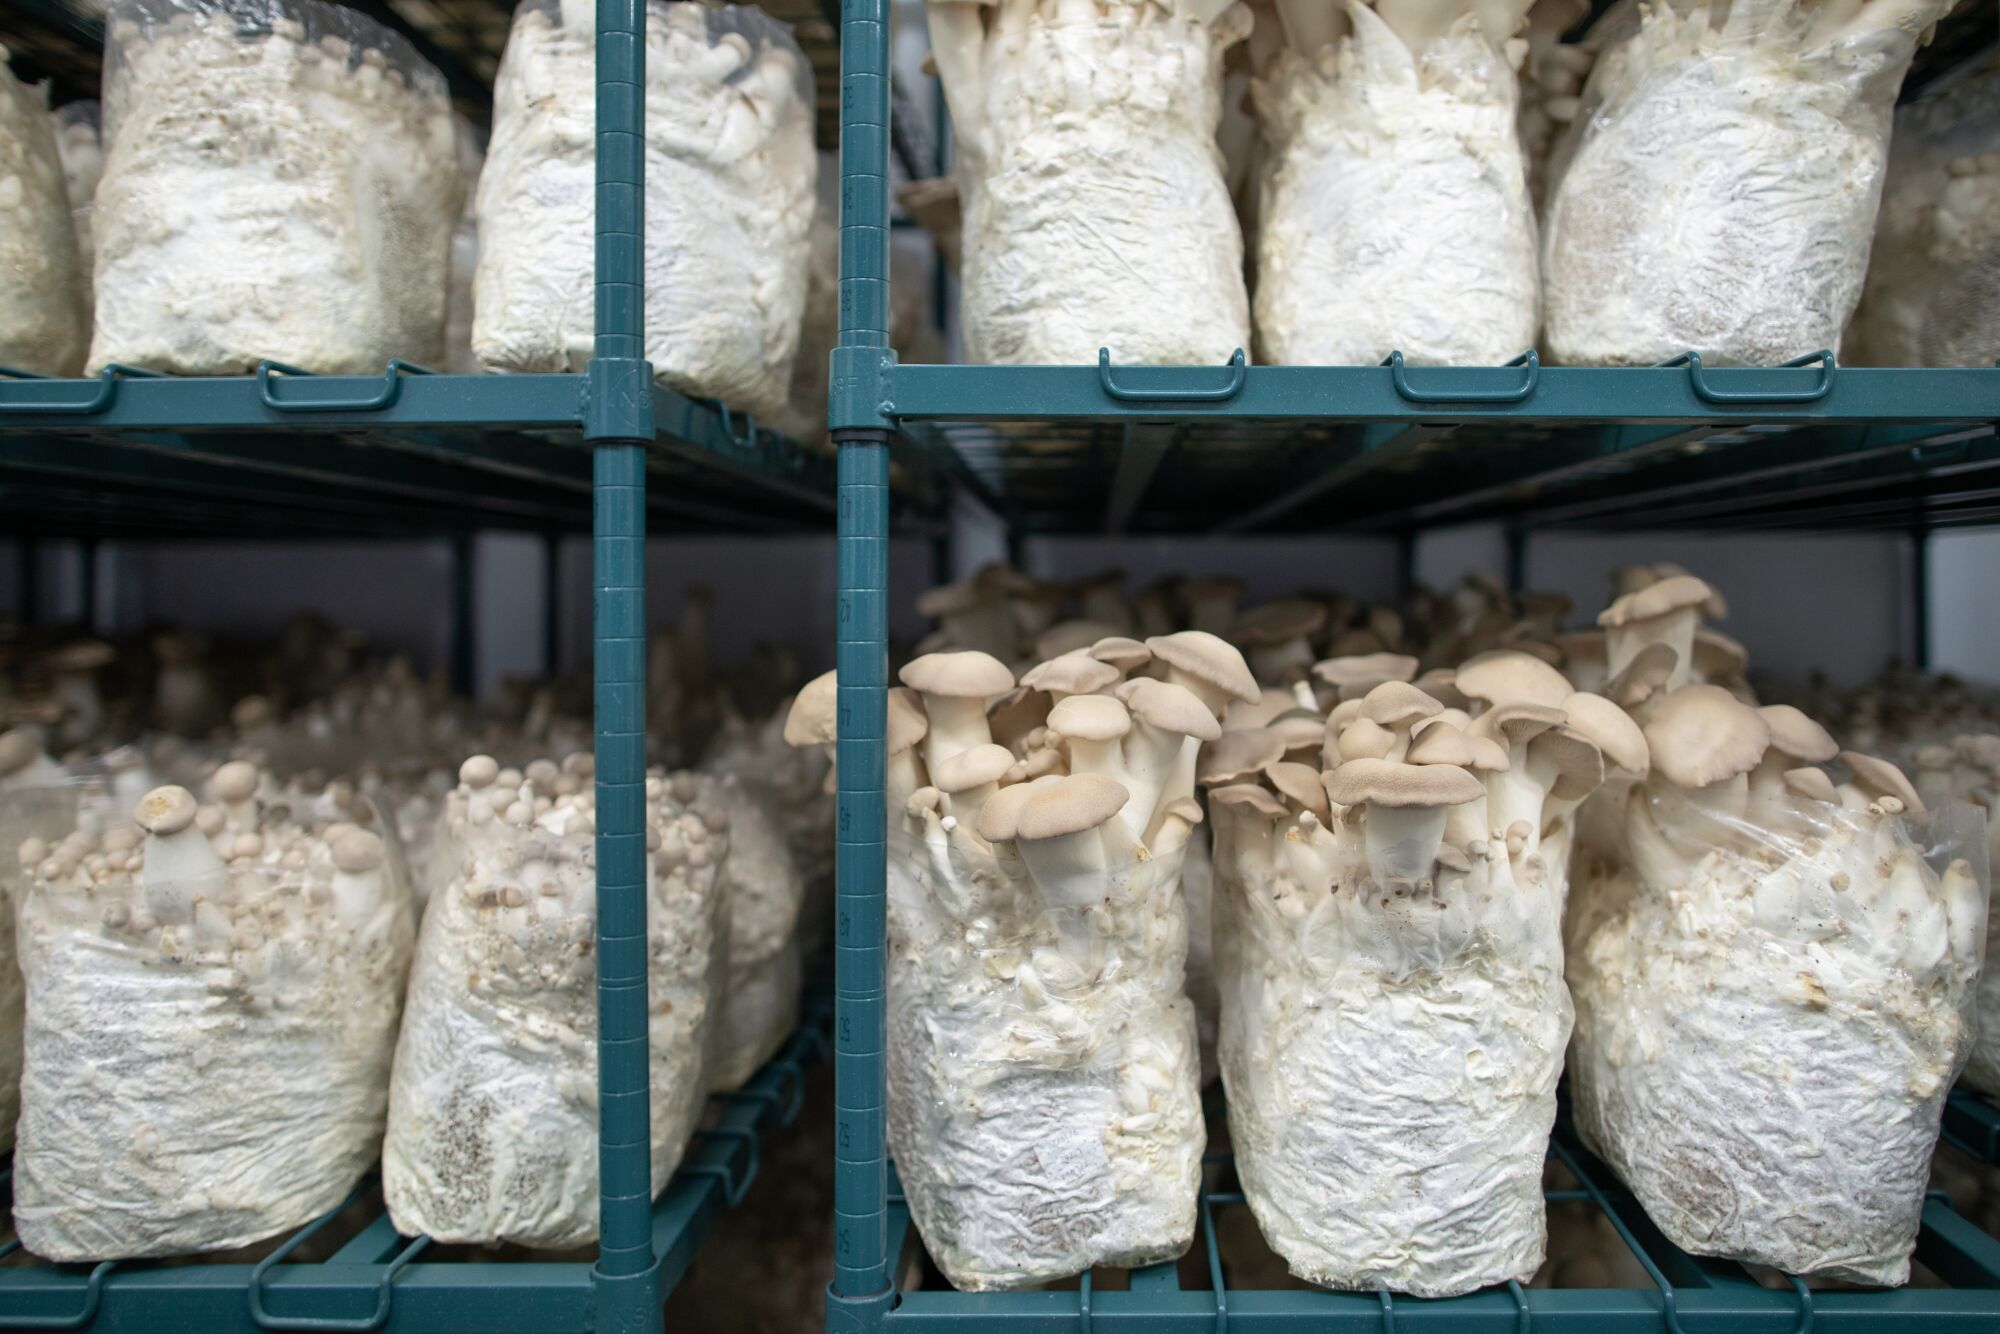 King trumpet or king oyster mushrooms grow in bags on shelves at Smallhold.